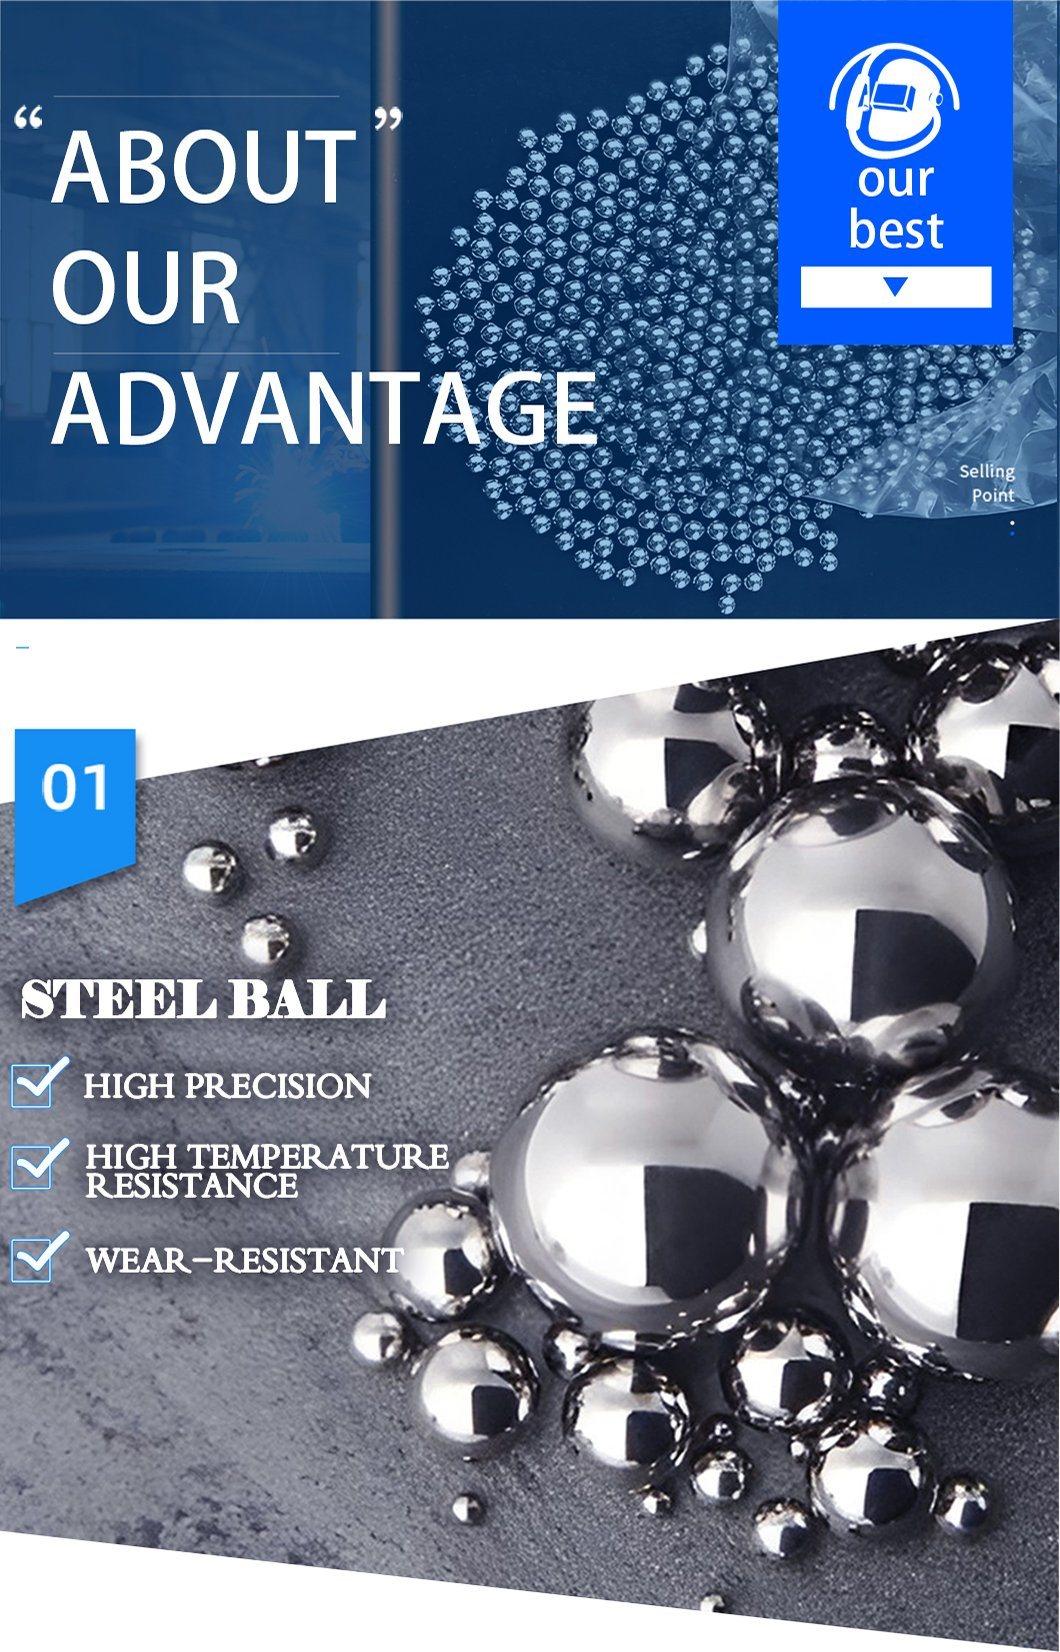 Precision Customized 1.5mm-25.4mm G20-G1000 High Carbon Steel Ball Highly Polished Mirror